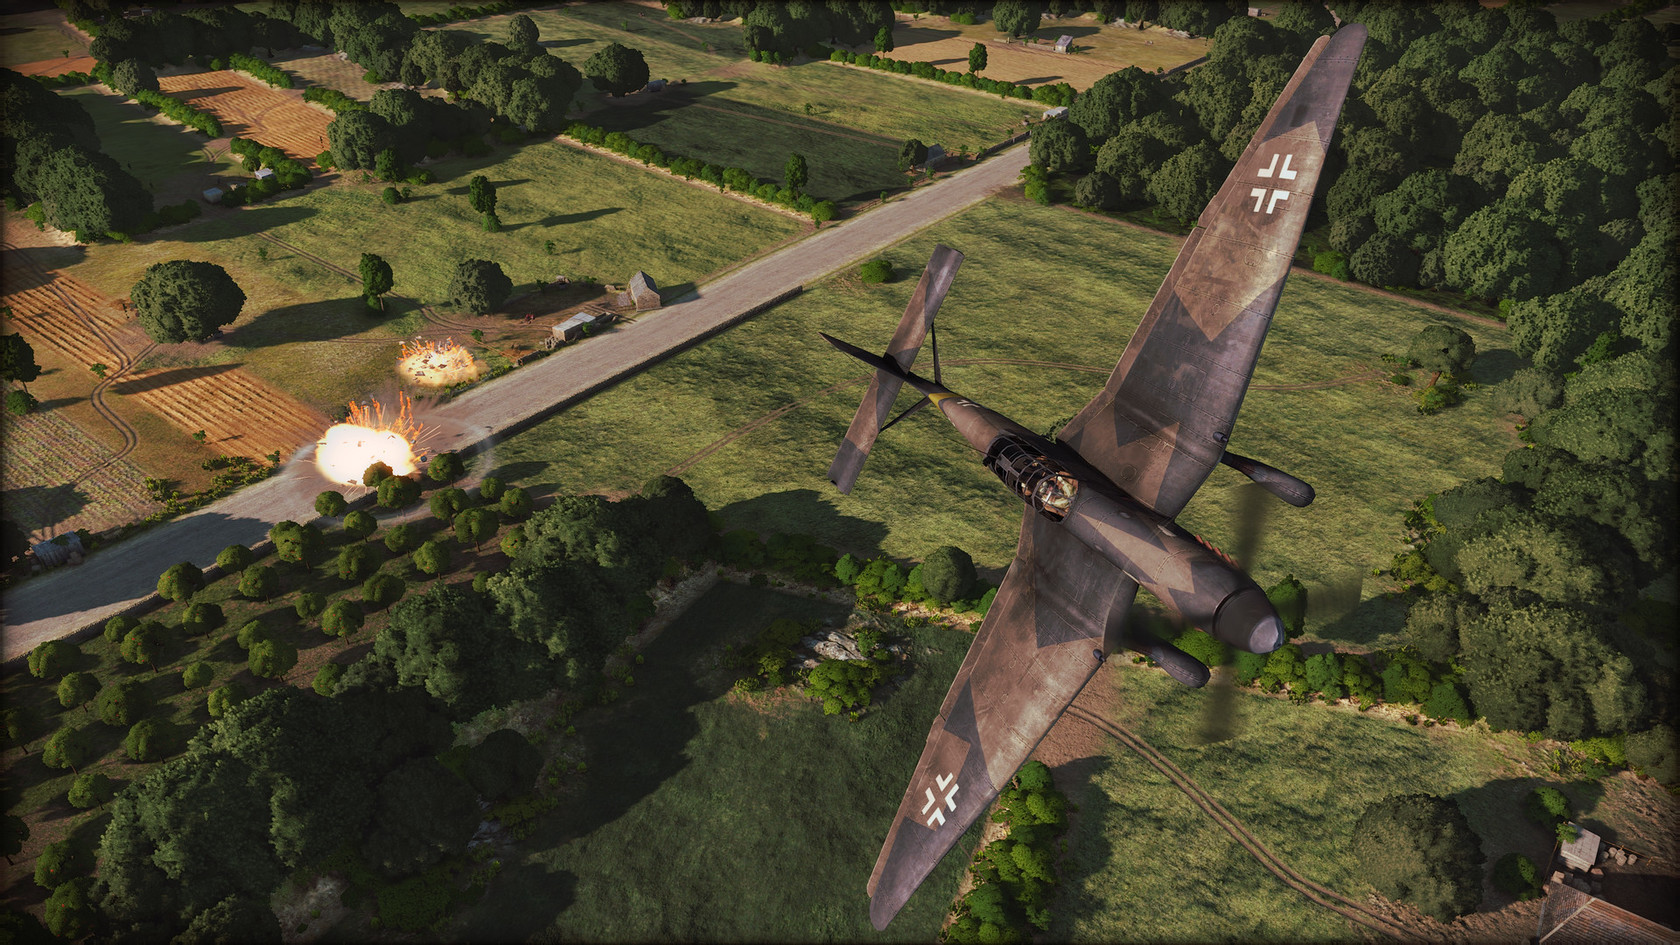 normandy 44 steel division download free